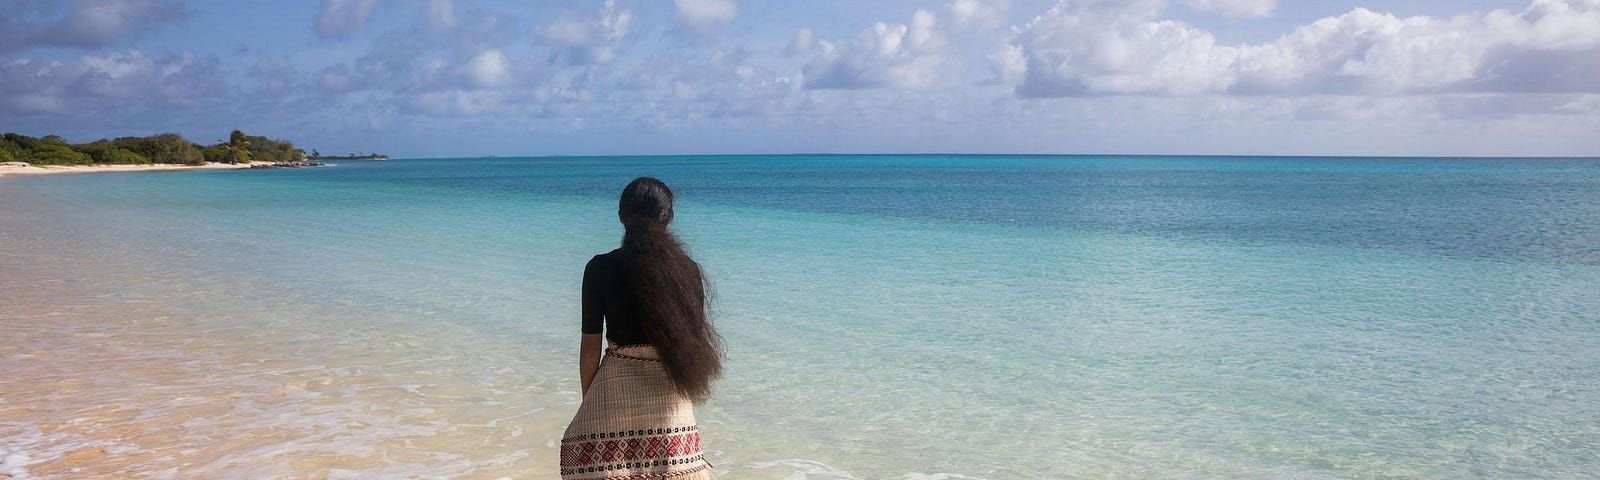 A woman, Kathy Jetñil-Kijiner, stands at the shoreline with her back turned to the camera. She is wearing a traditional jaki-ed. The sky is filled with clouds and the ocean is clear and crystalline.